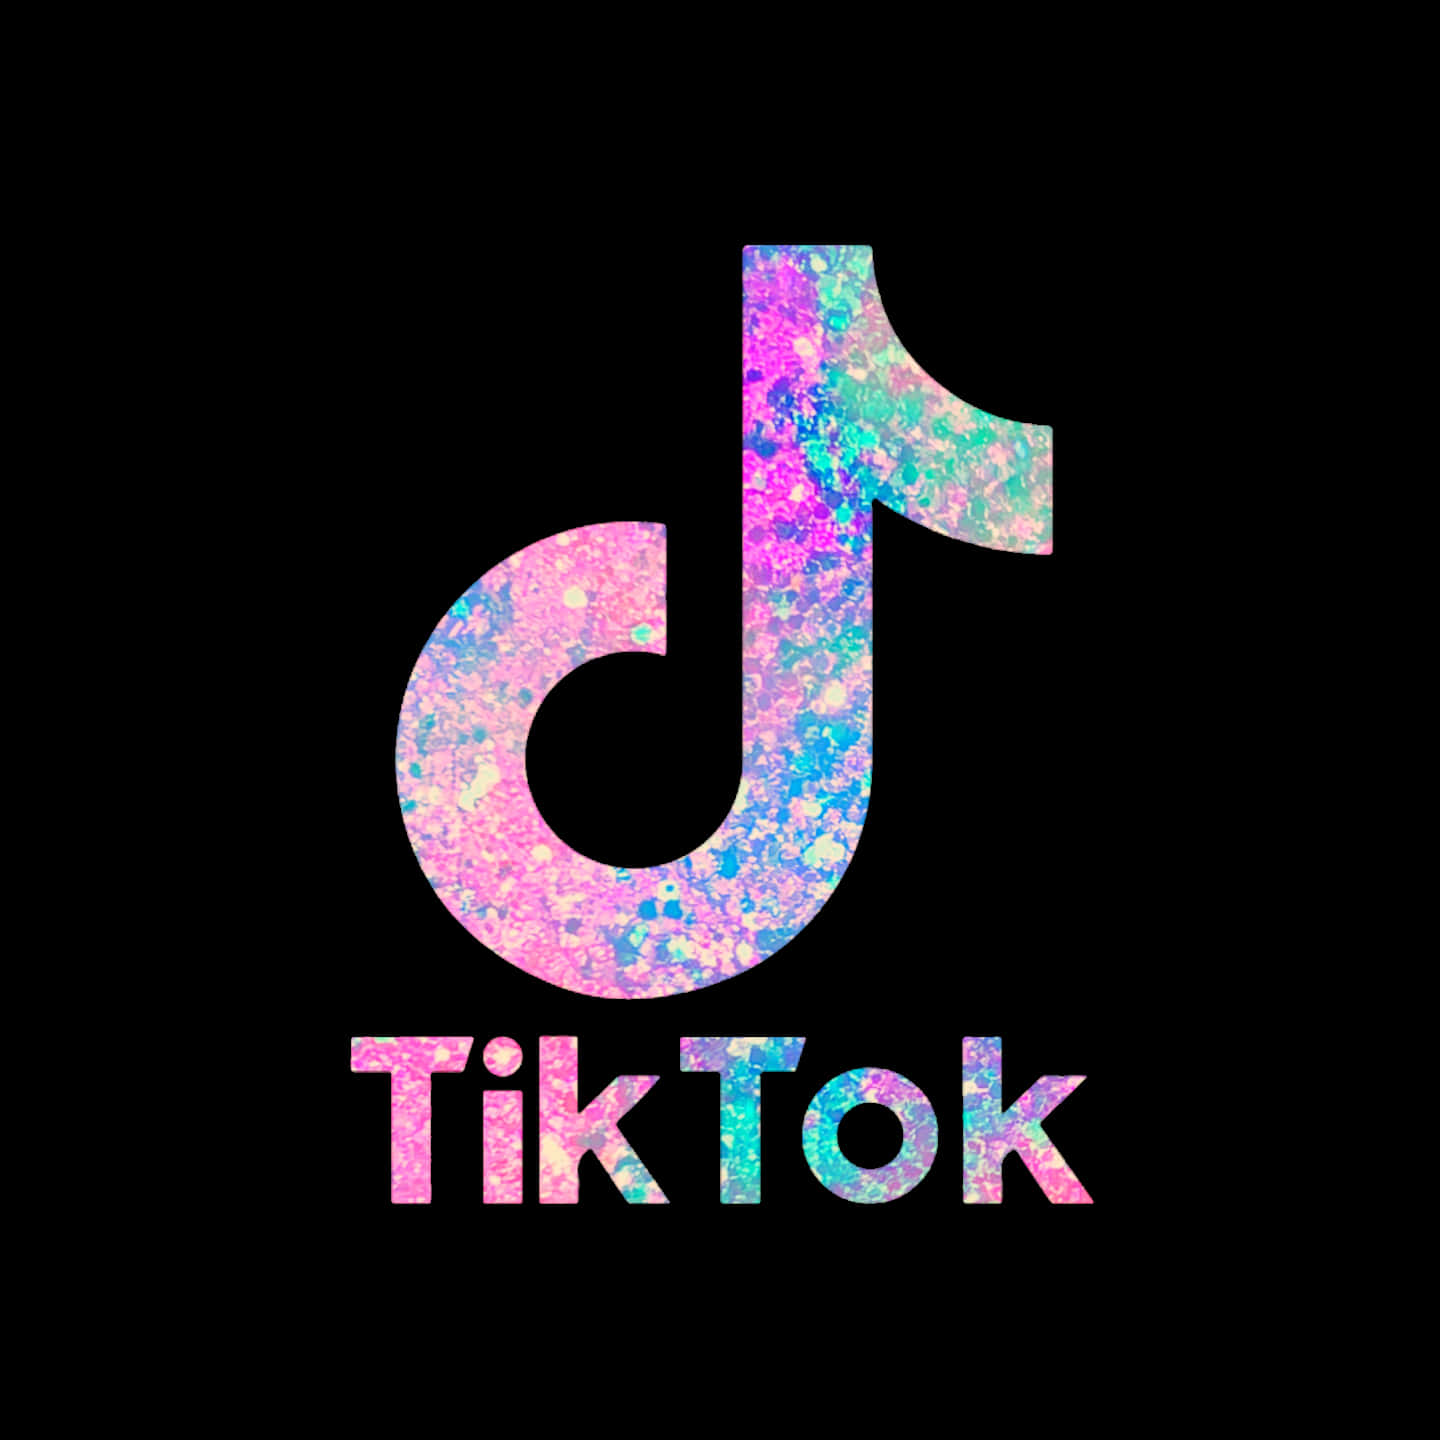 Download tiktok logo with a pink and blue glitter | Wallpapers.com